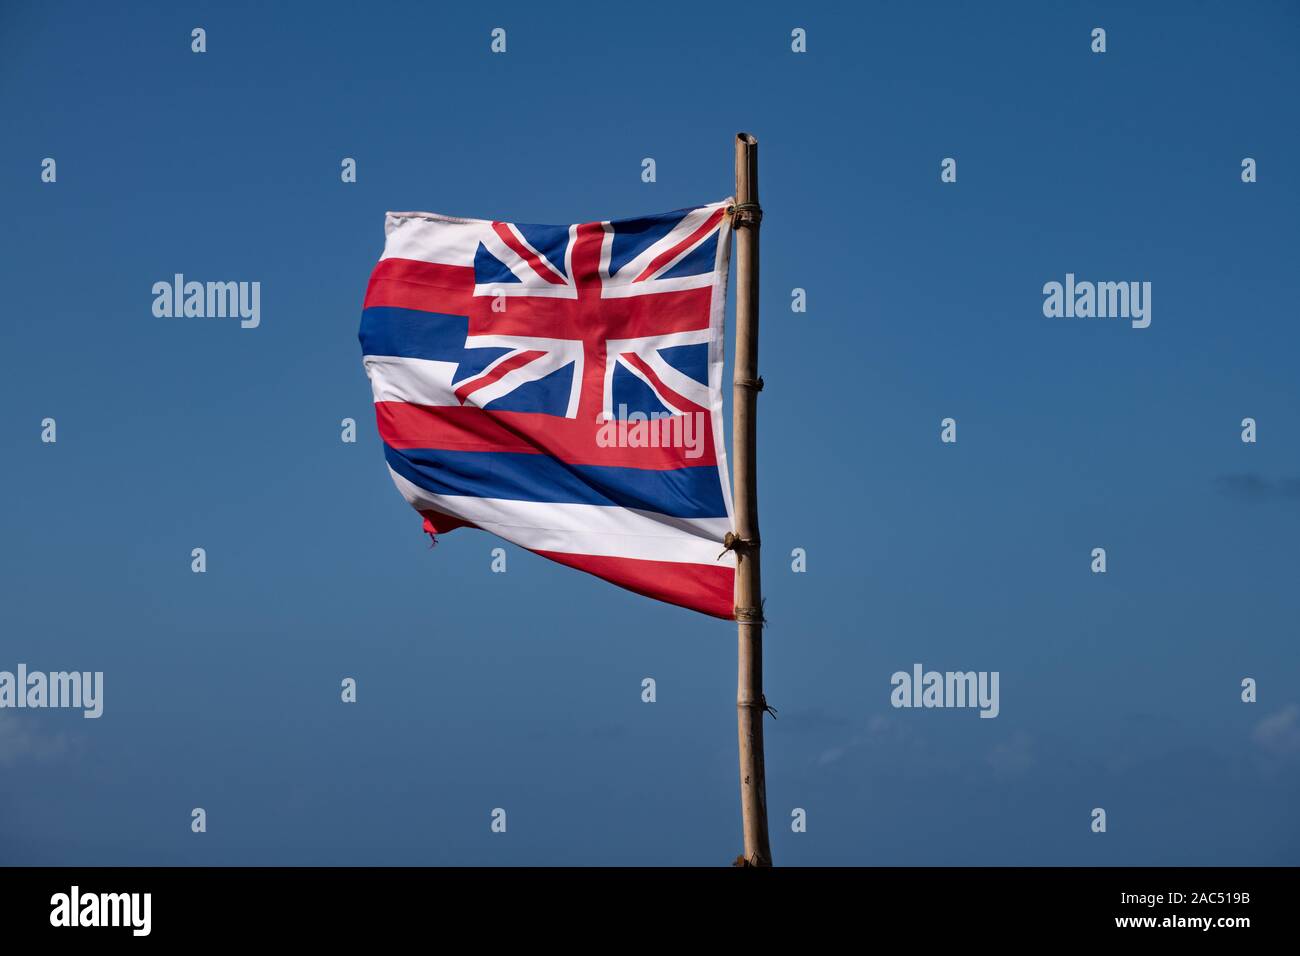 Hawaiian flag fluttering in the wind against a blue sky Stock Photo